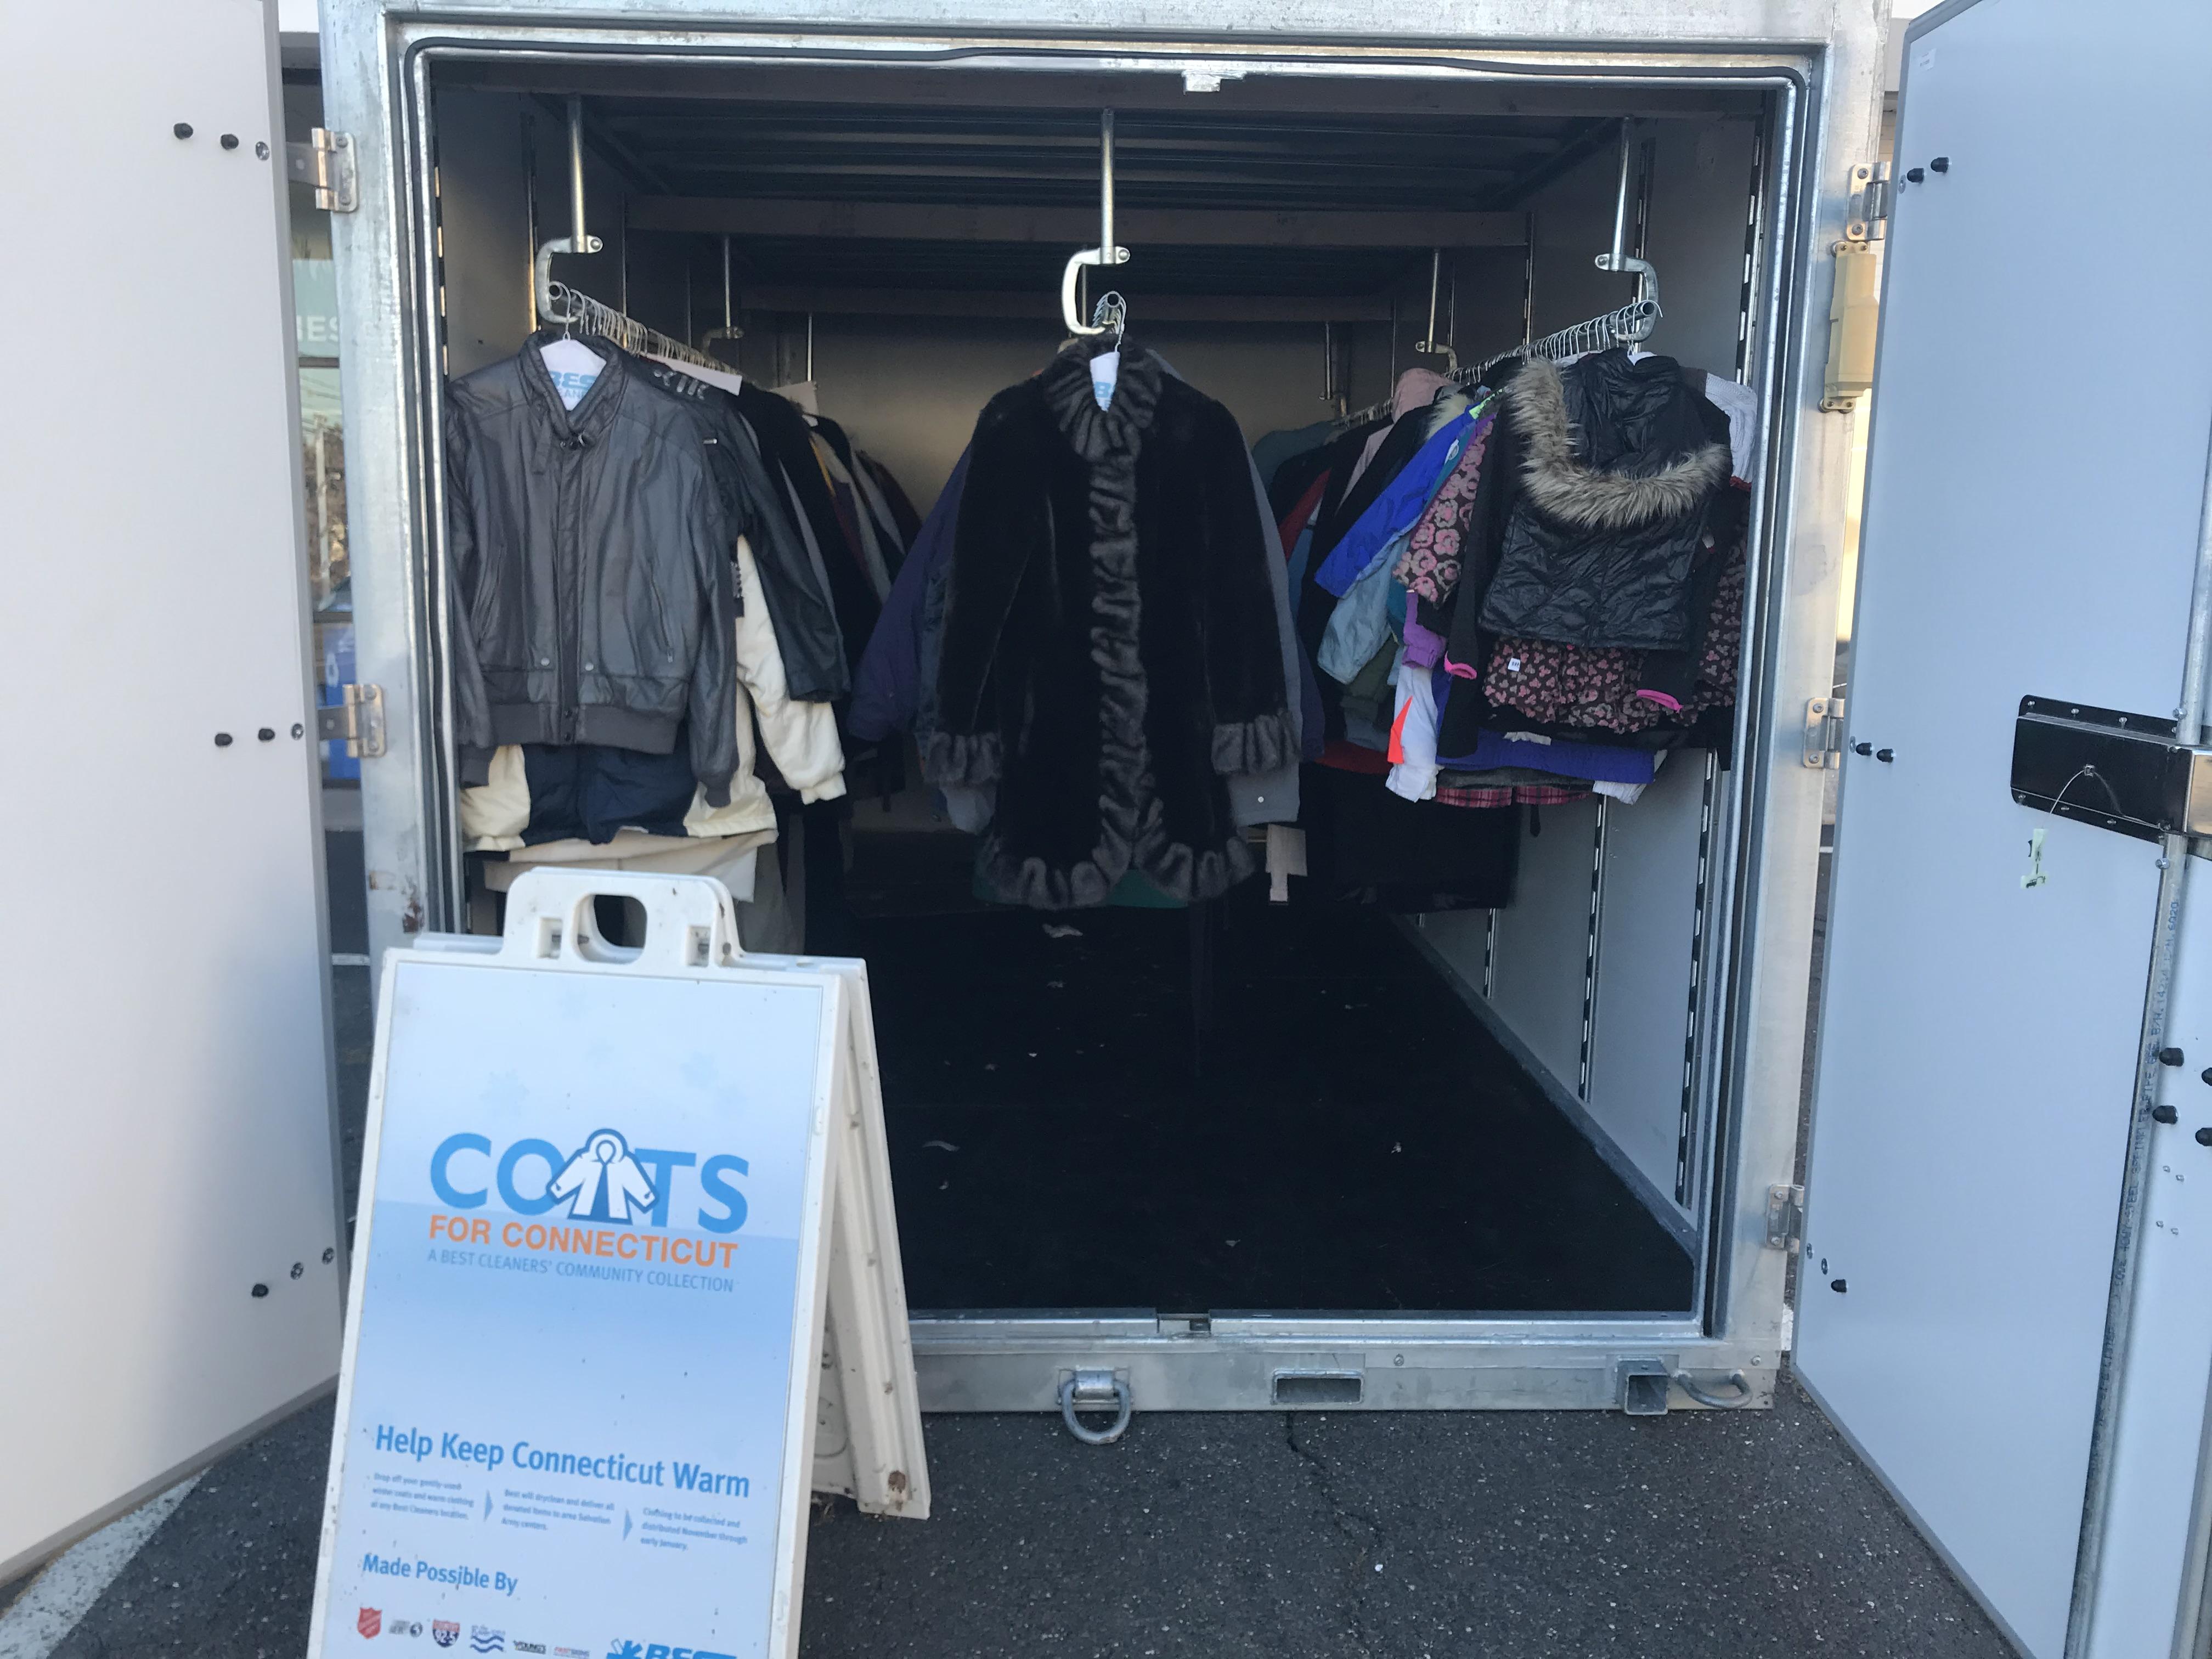 storage container being used for coats for Connecticut charity